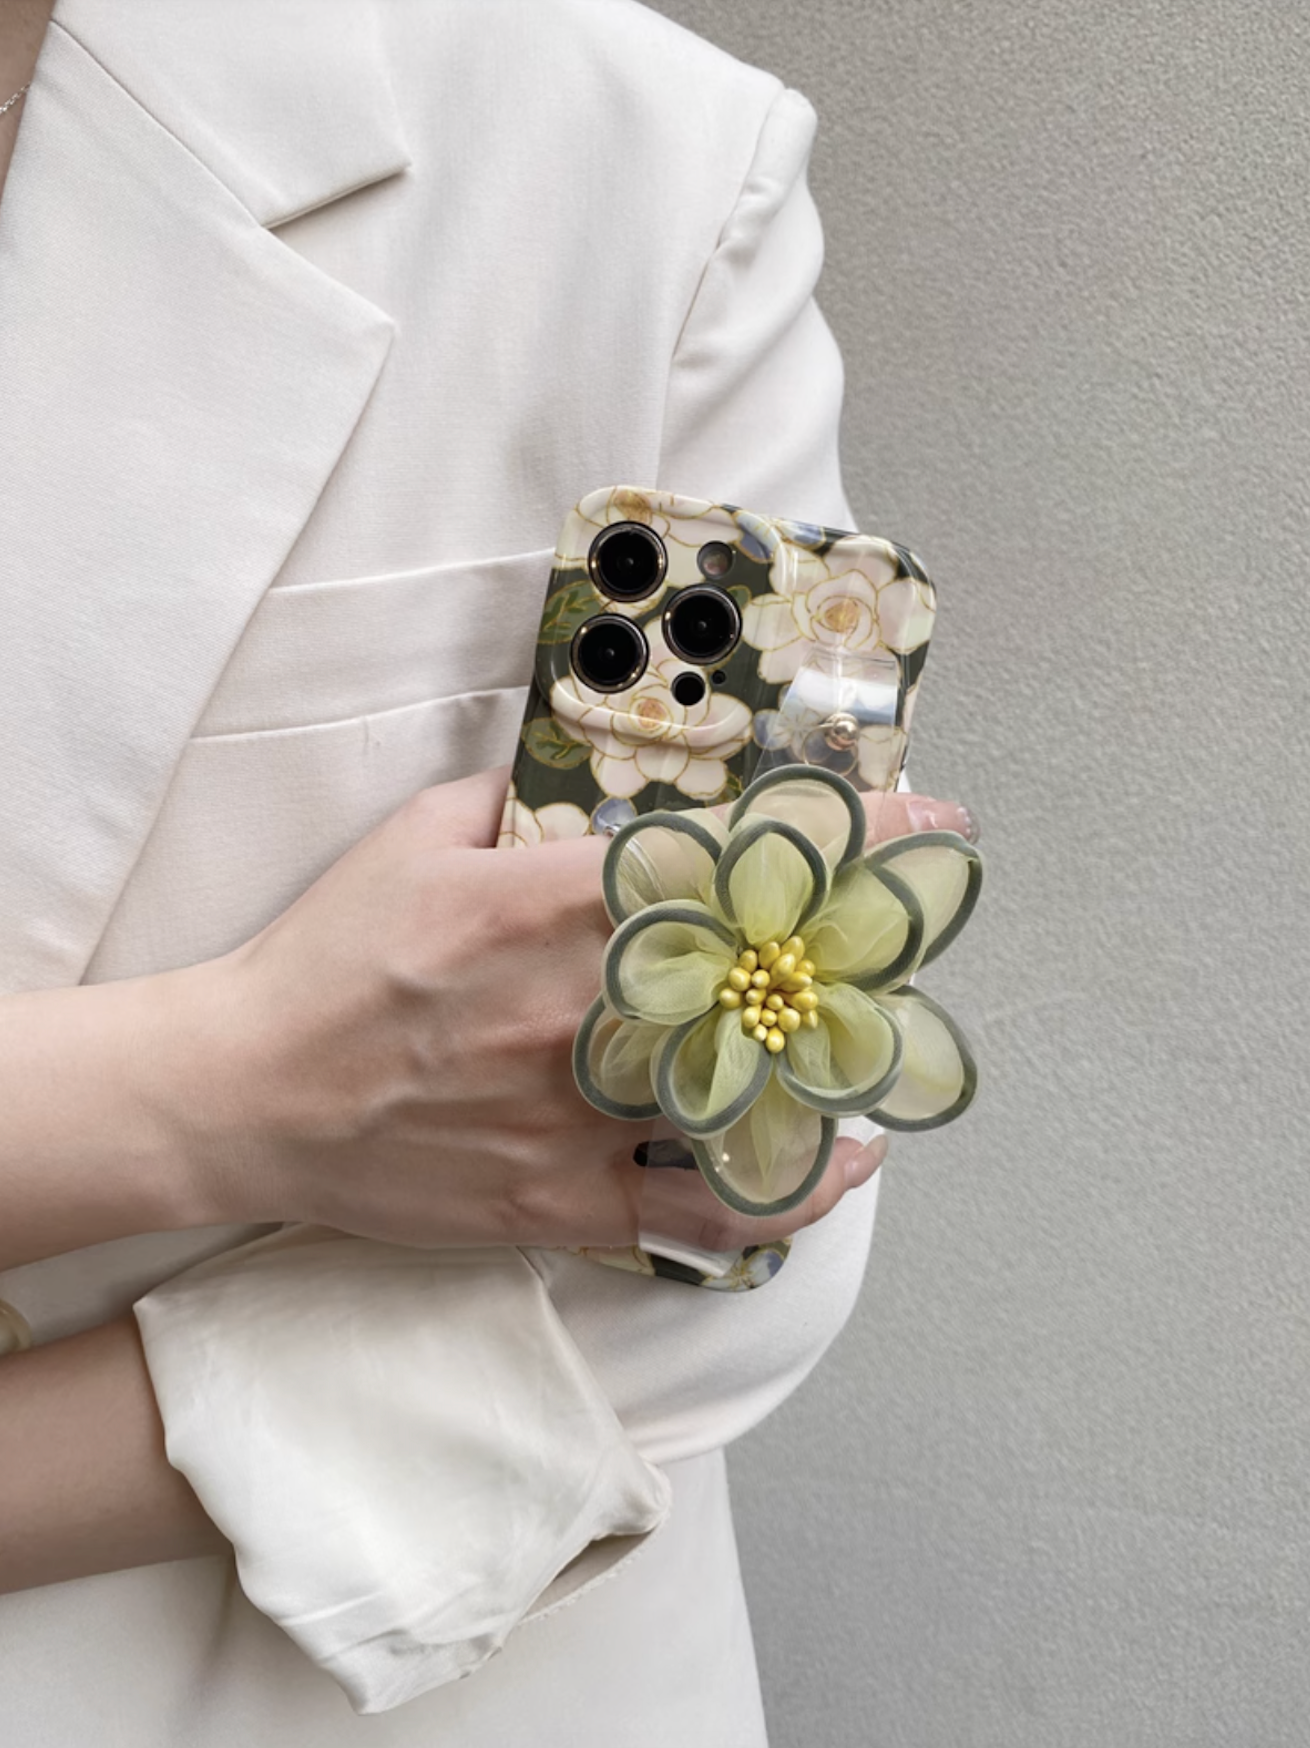 Painting Flower Case For iPhone Series